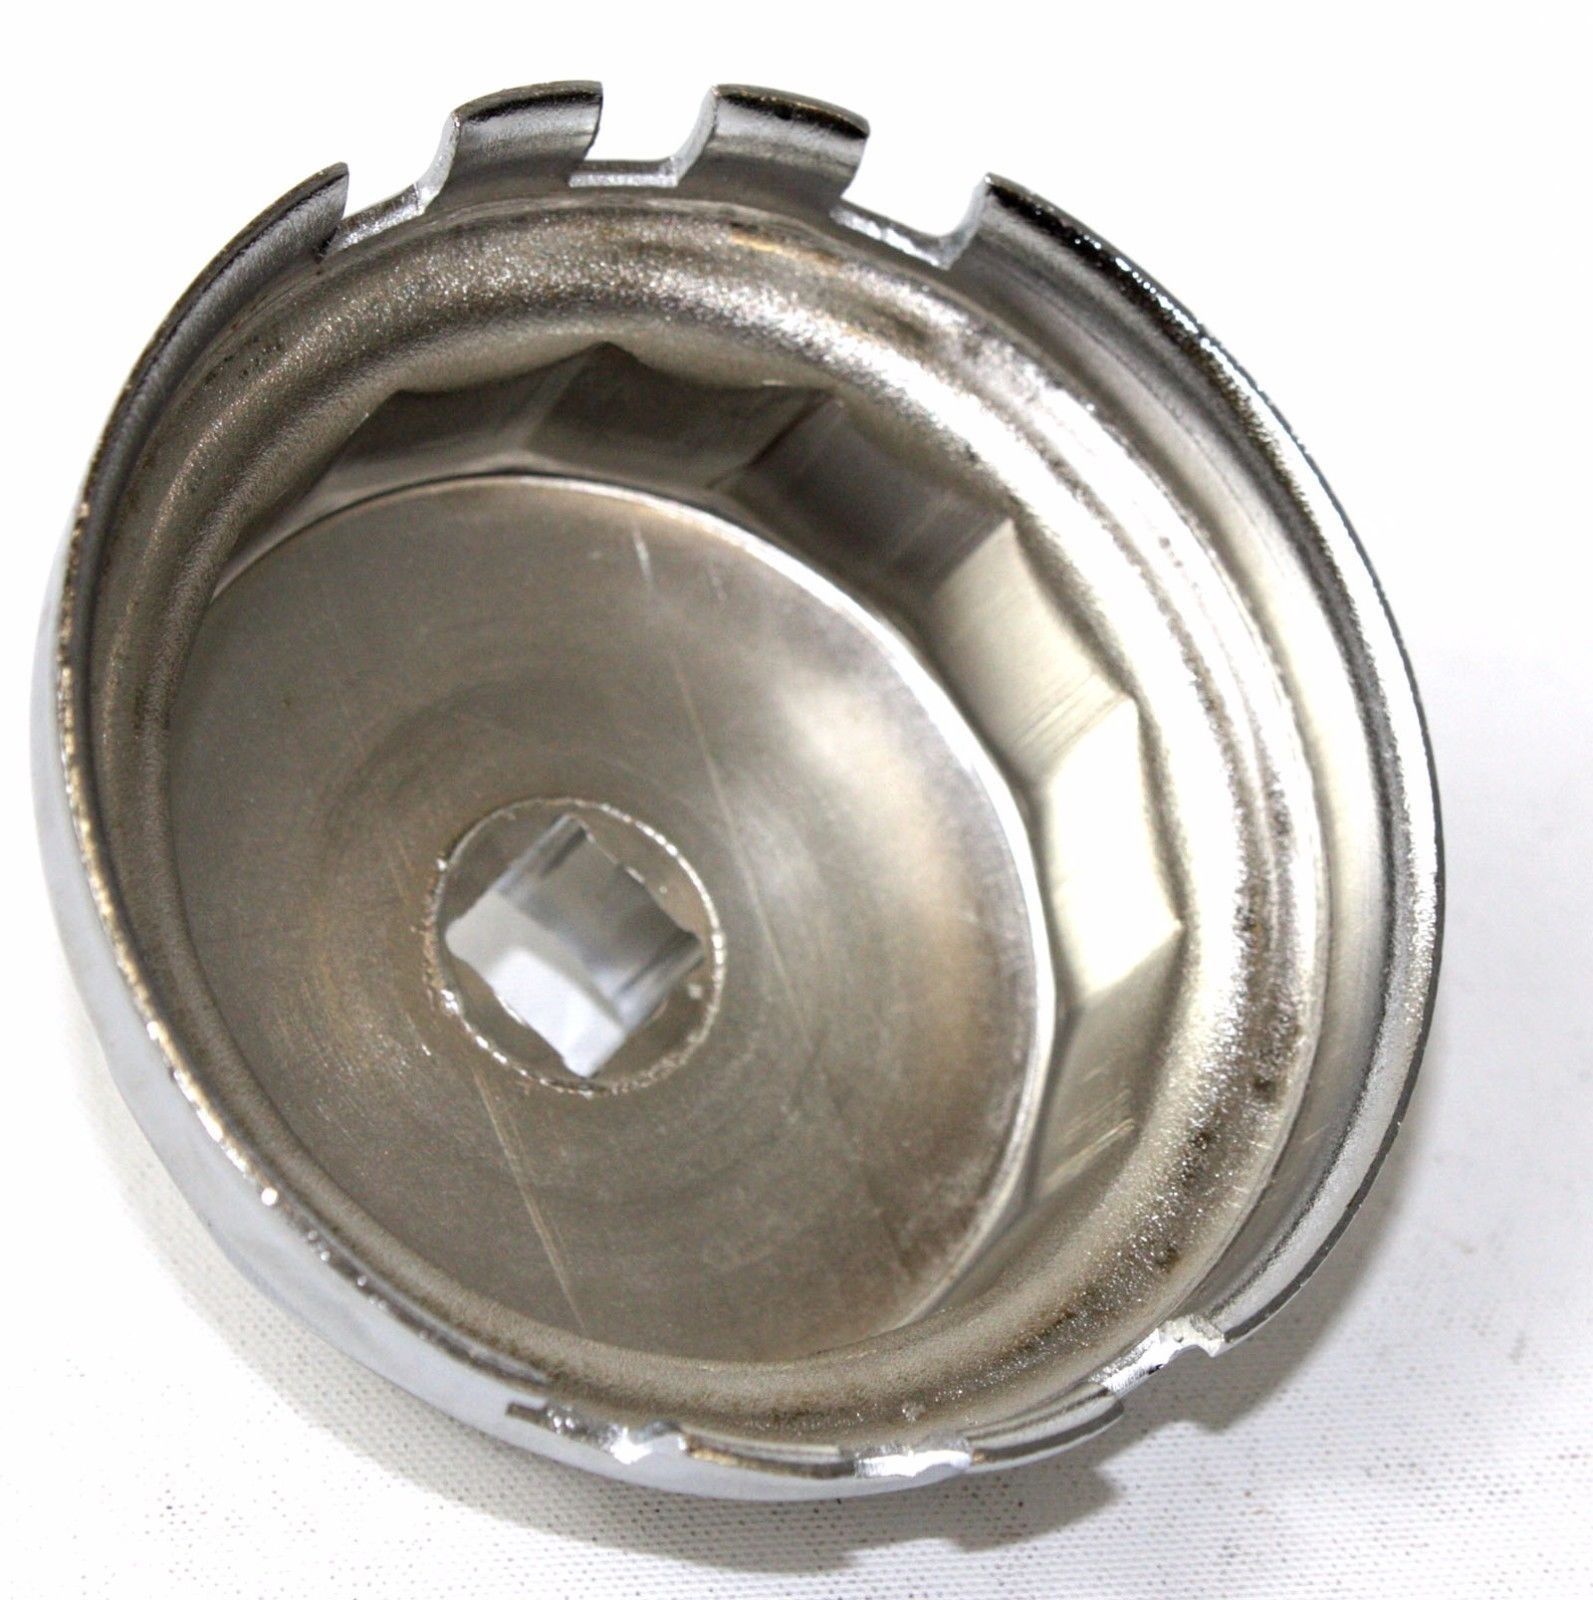 Oil Filter Wrench Cap Housing Tool Remover 64 5mm 14 Flutes For